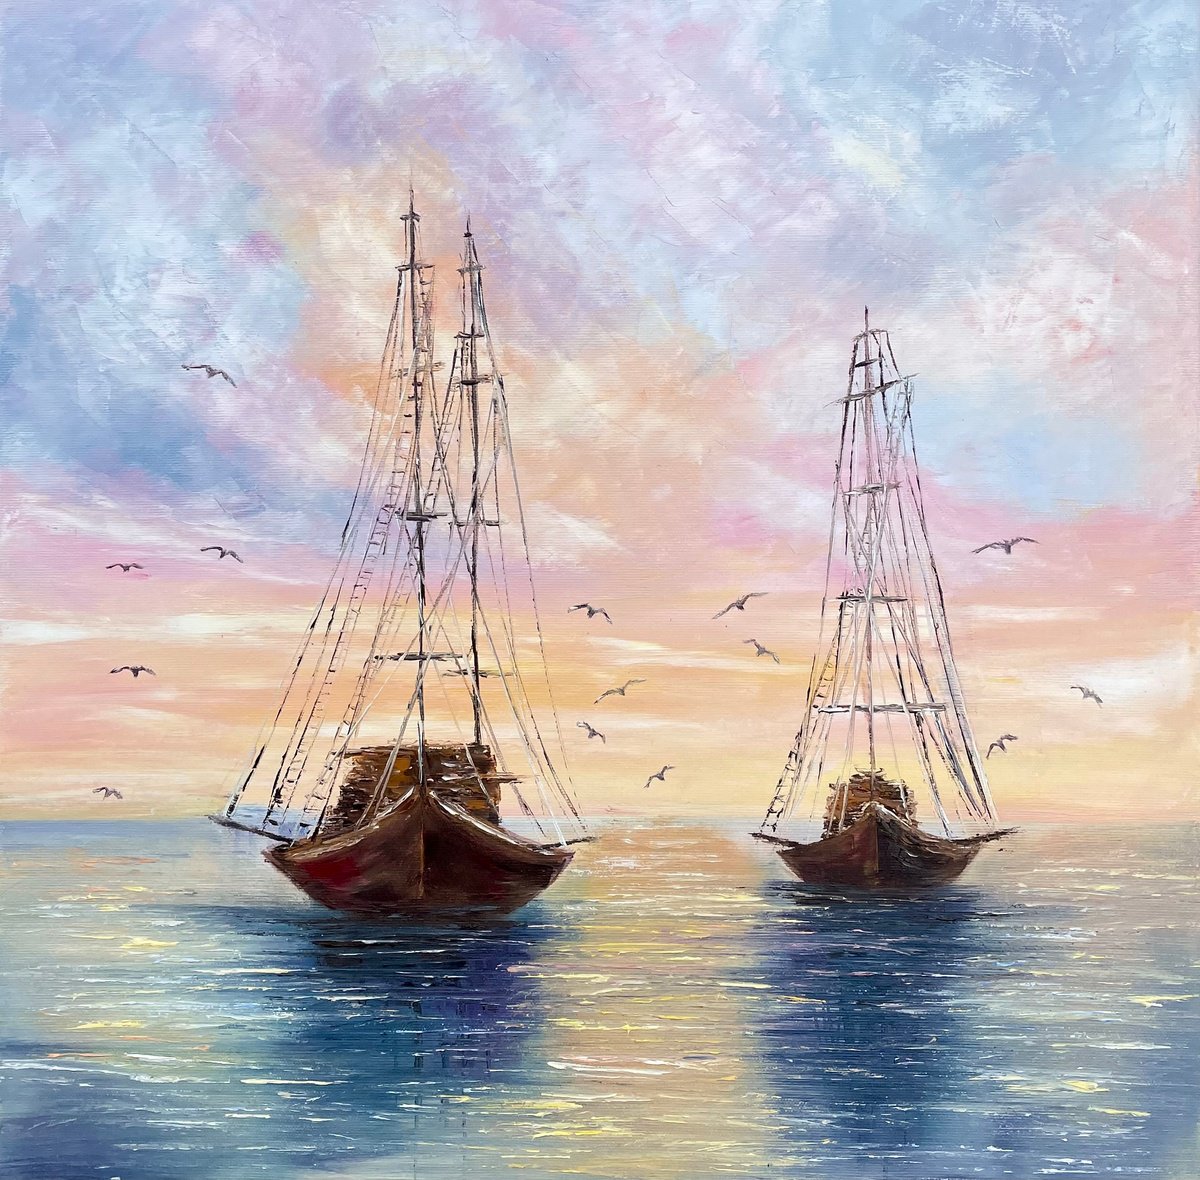 Shoreline Serenity: Two Sailboats by Tanja Frost